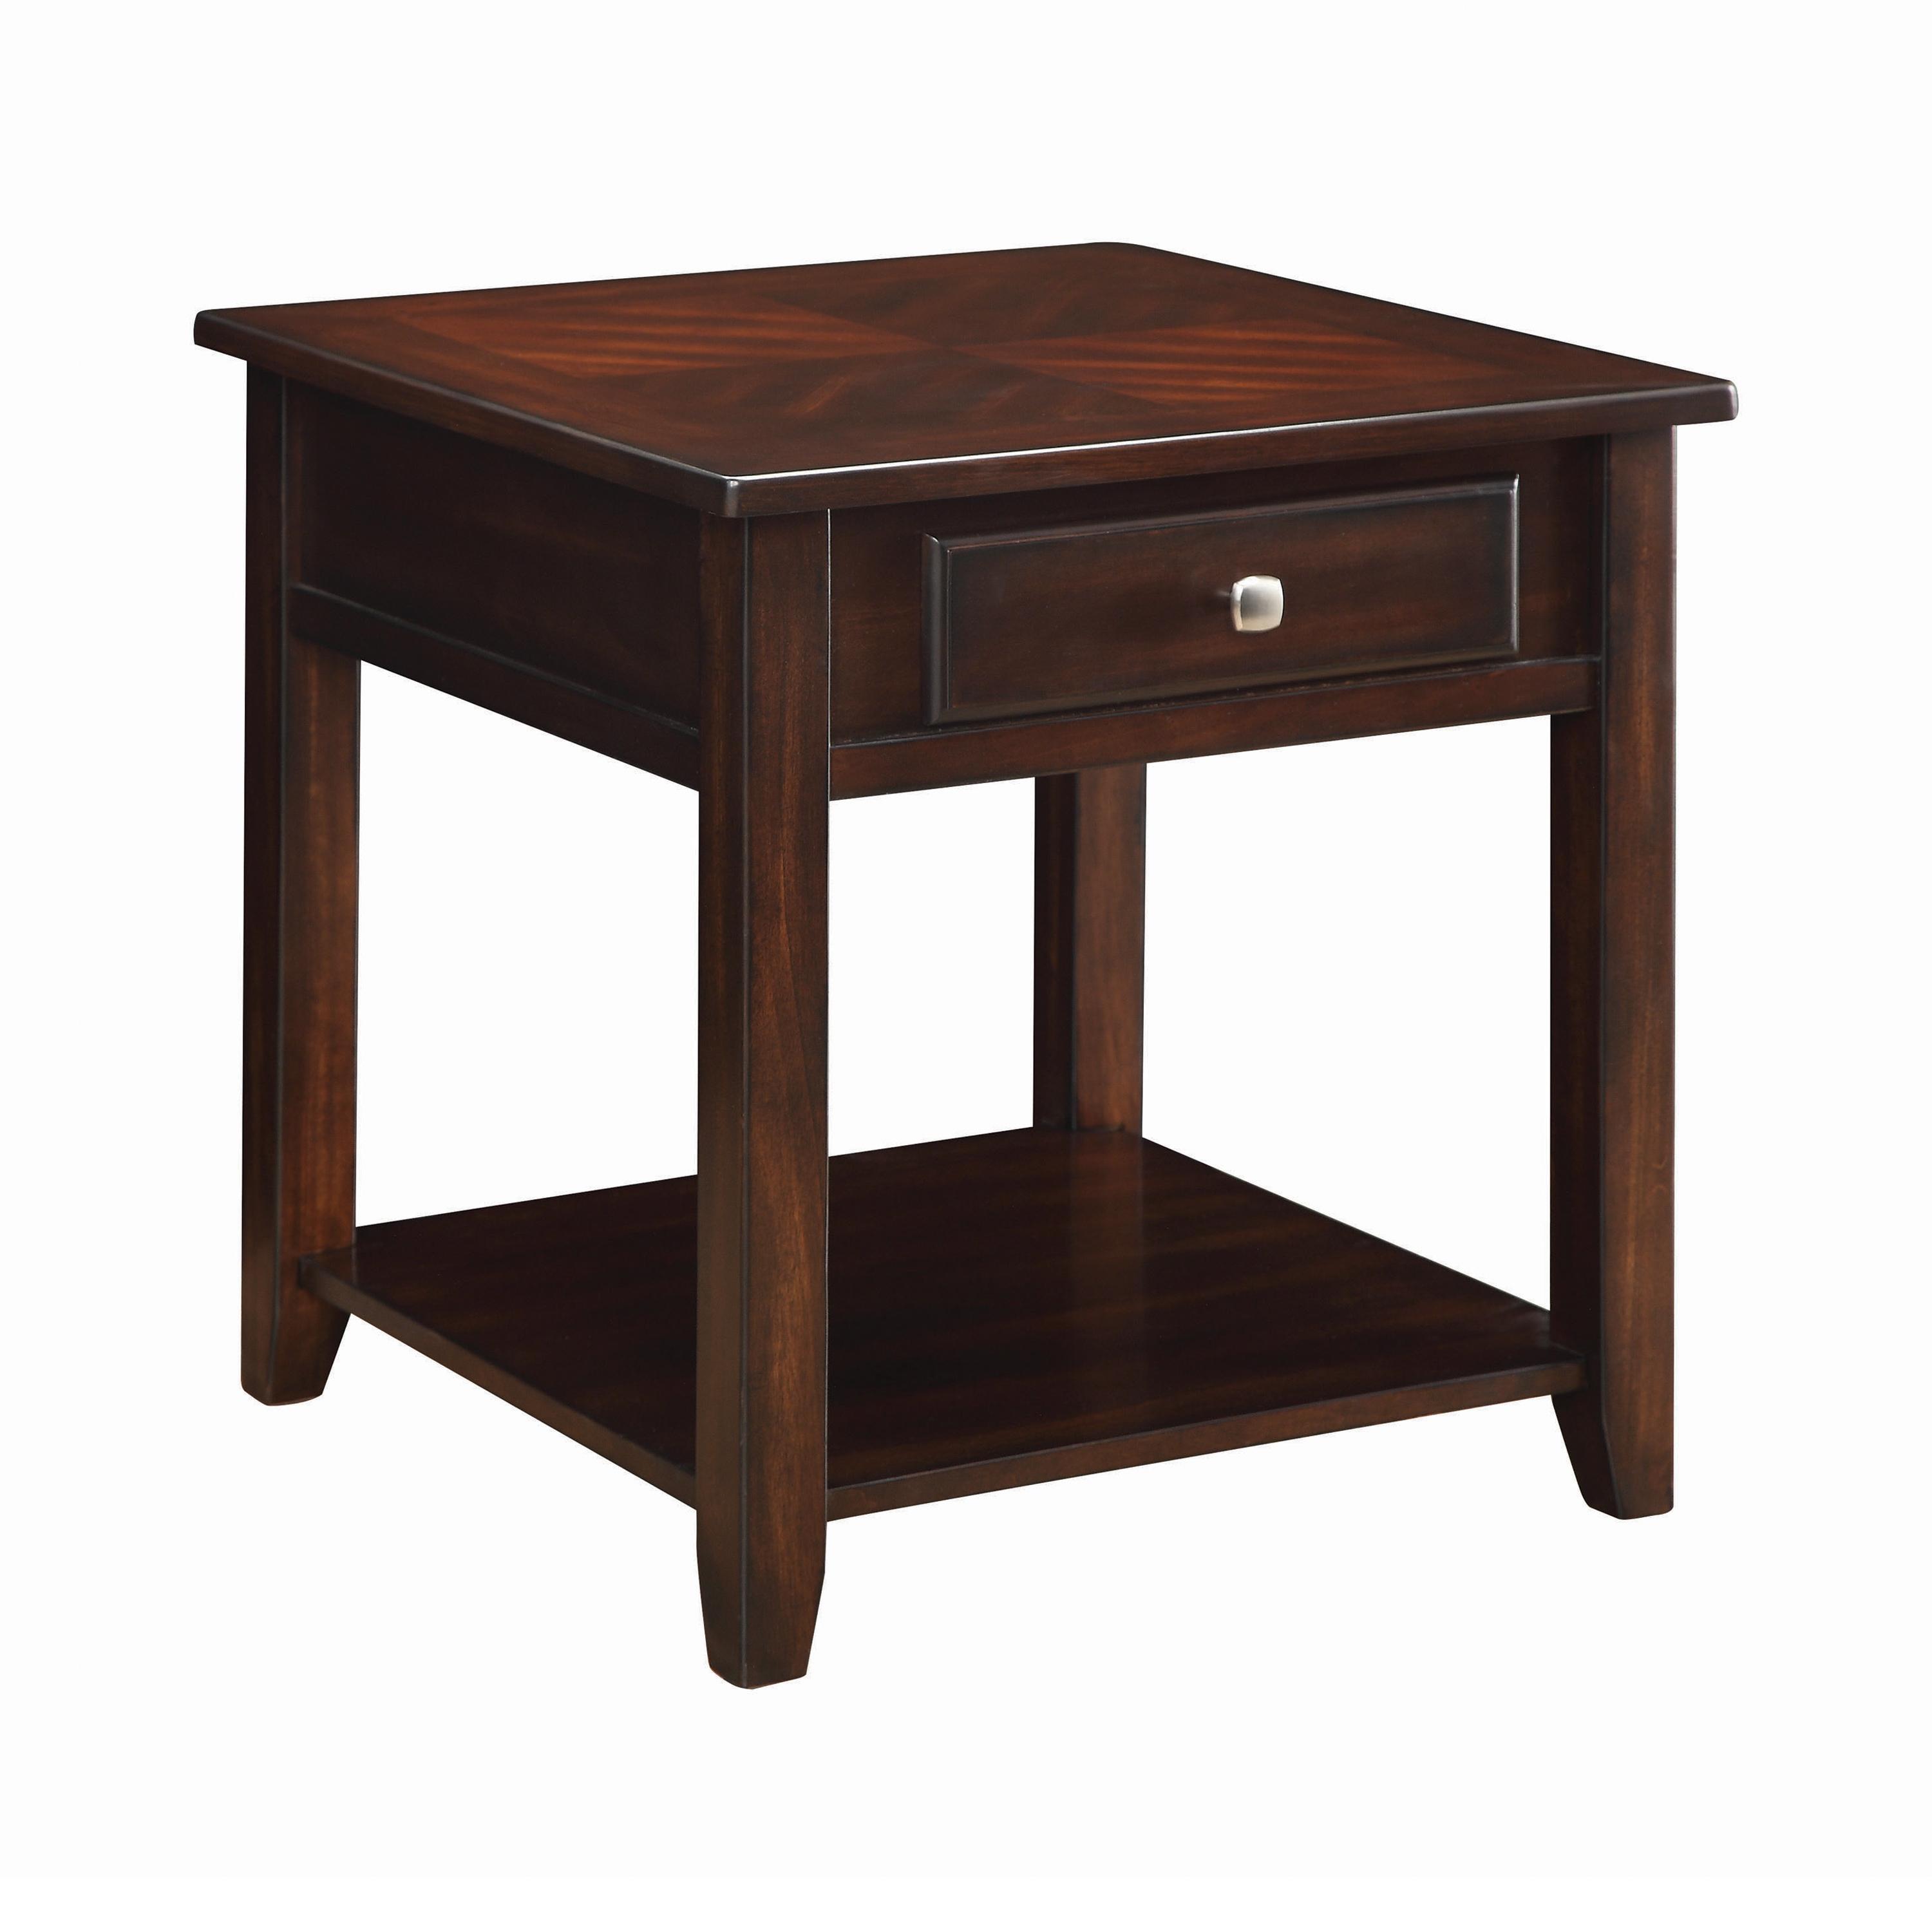 Transitional End Table 721037 721037 in Walnut 